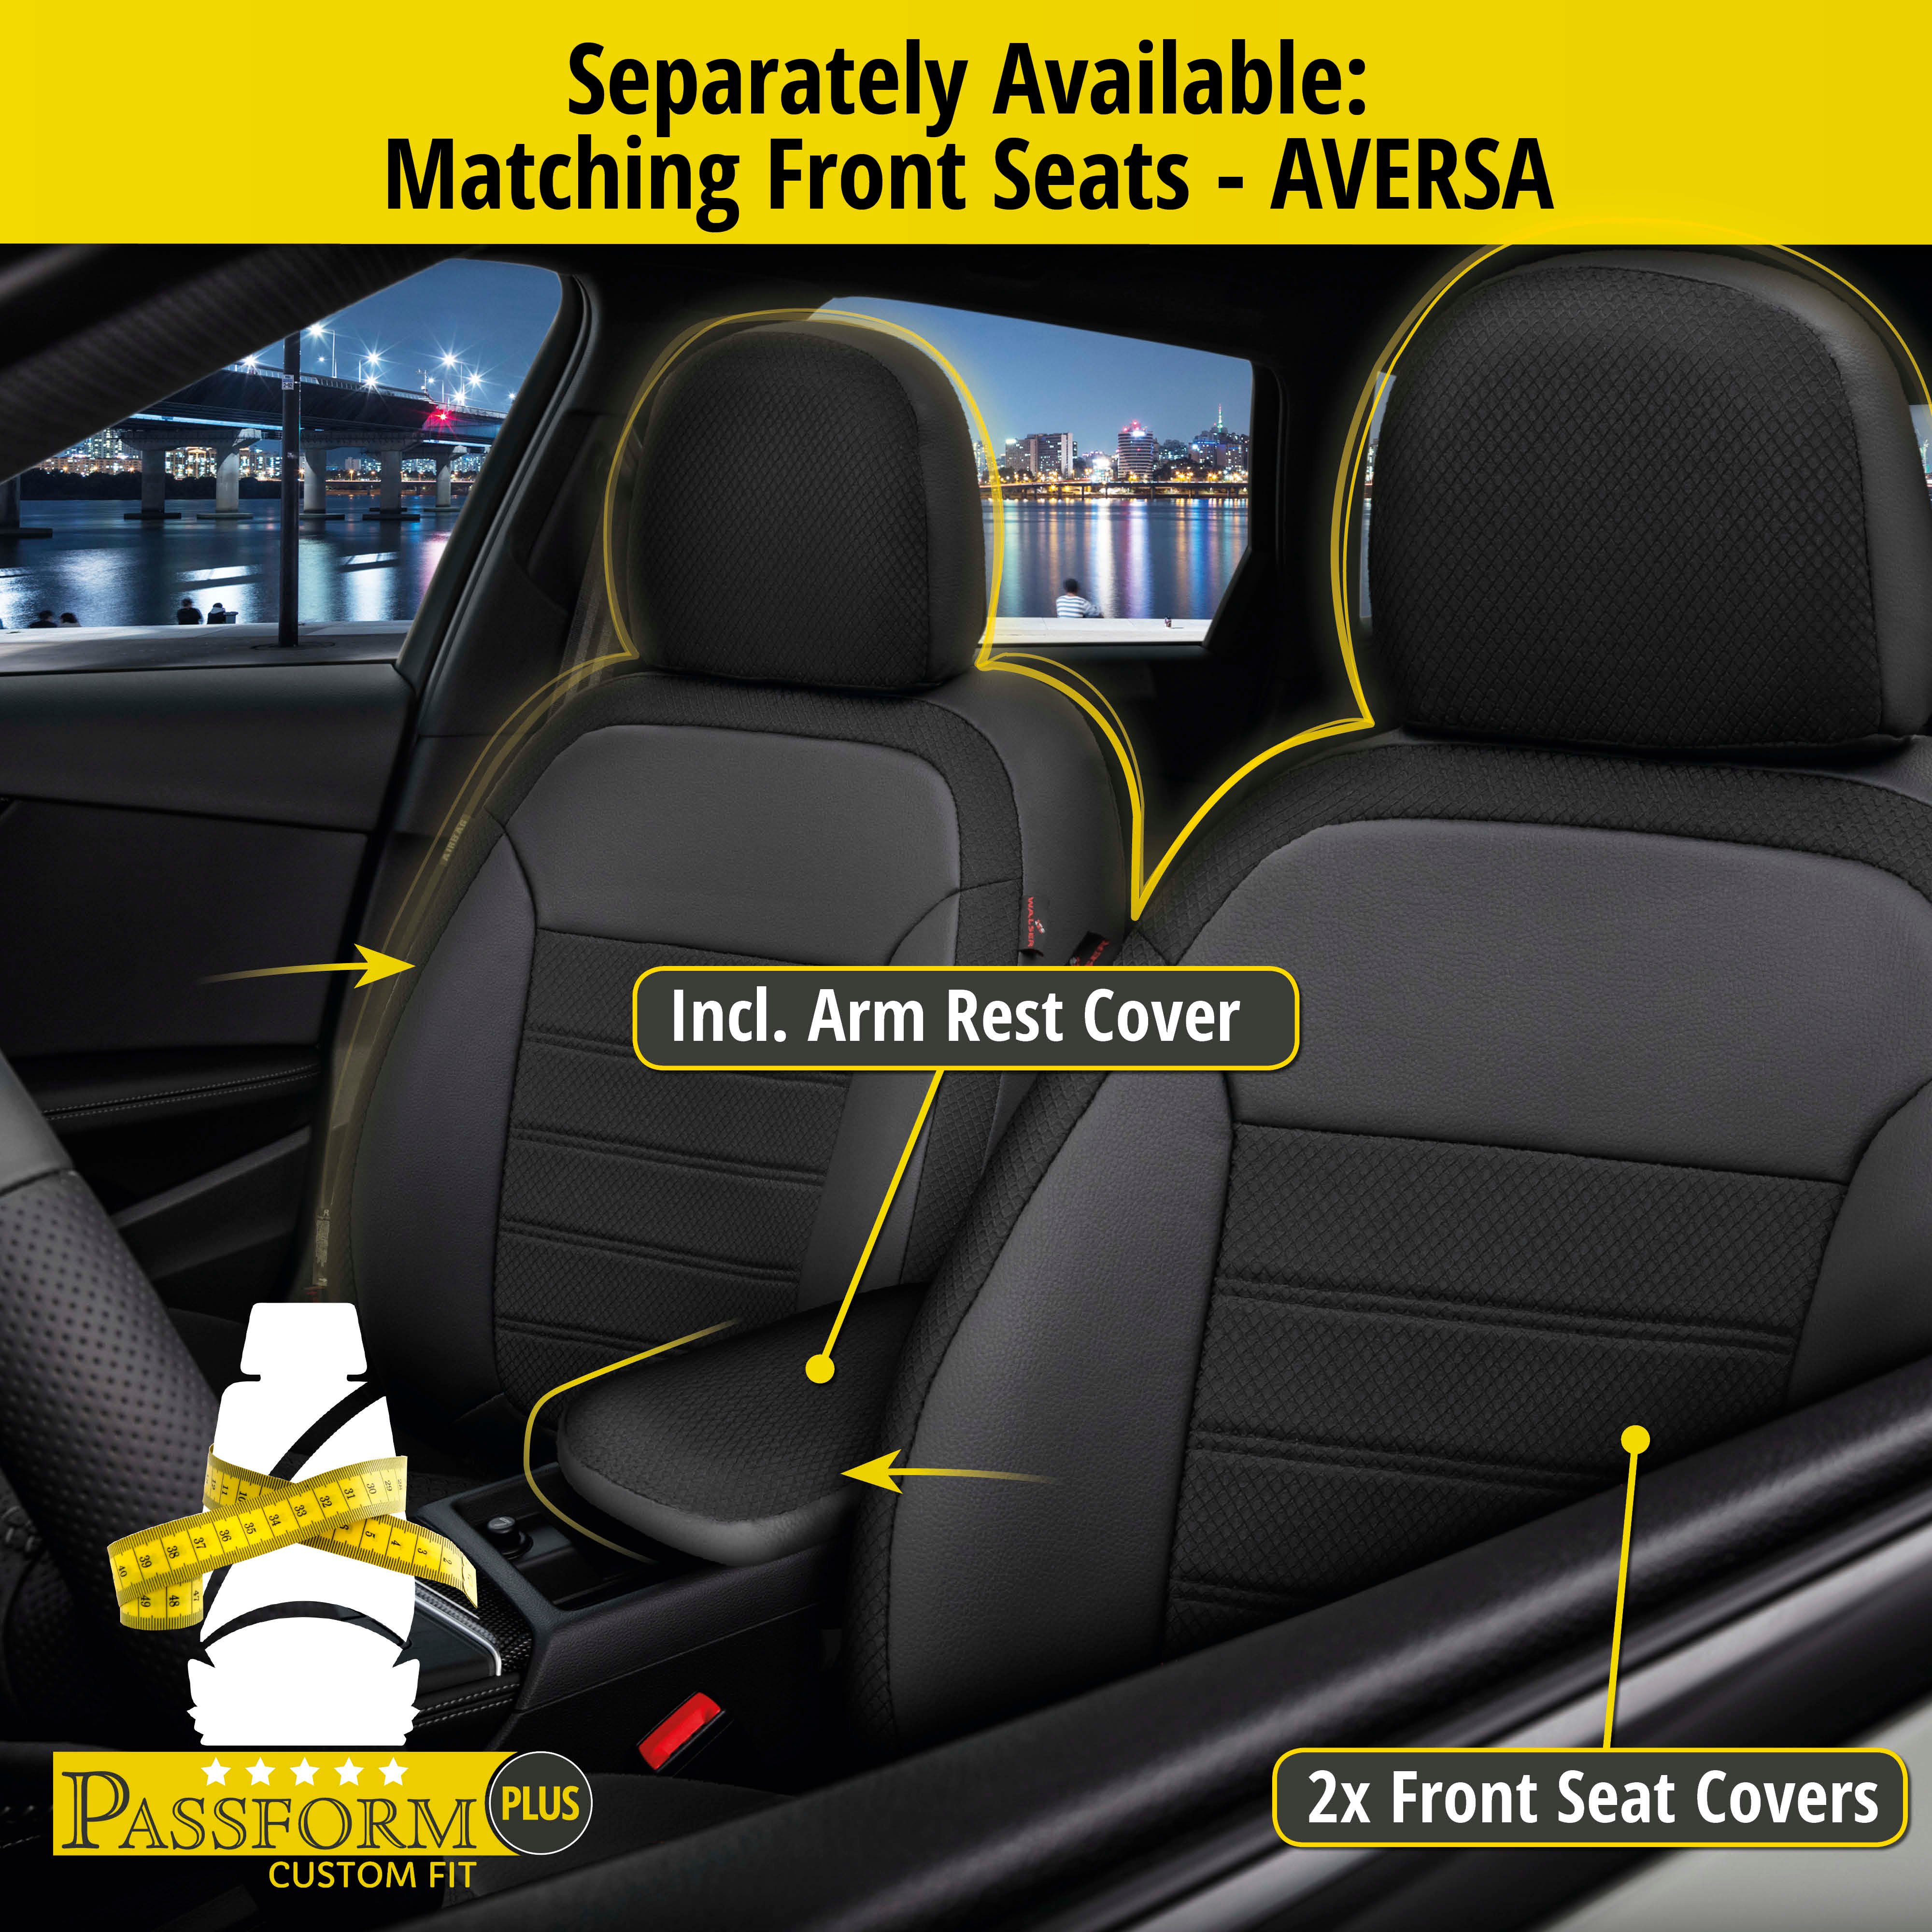 Seat Cover Aversa for Opel Zafira/Zafira Family B A05 07/2005-05/2019, 1 rear seat cover for normal seats